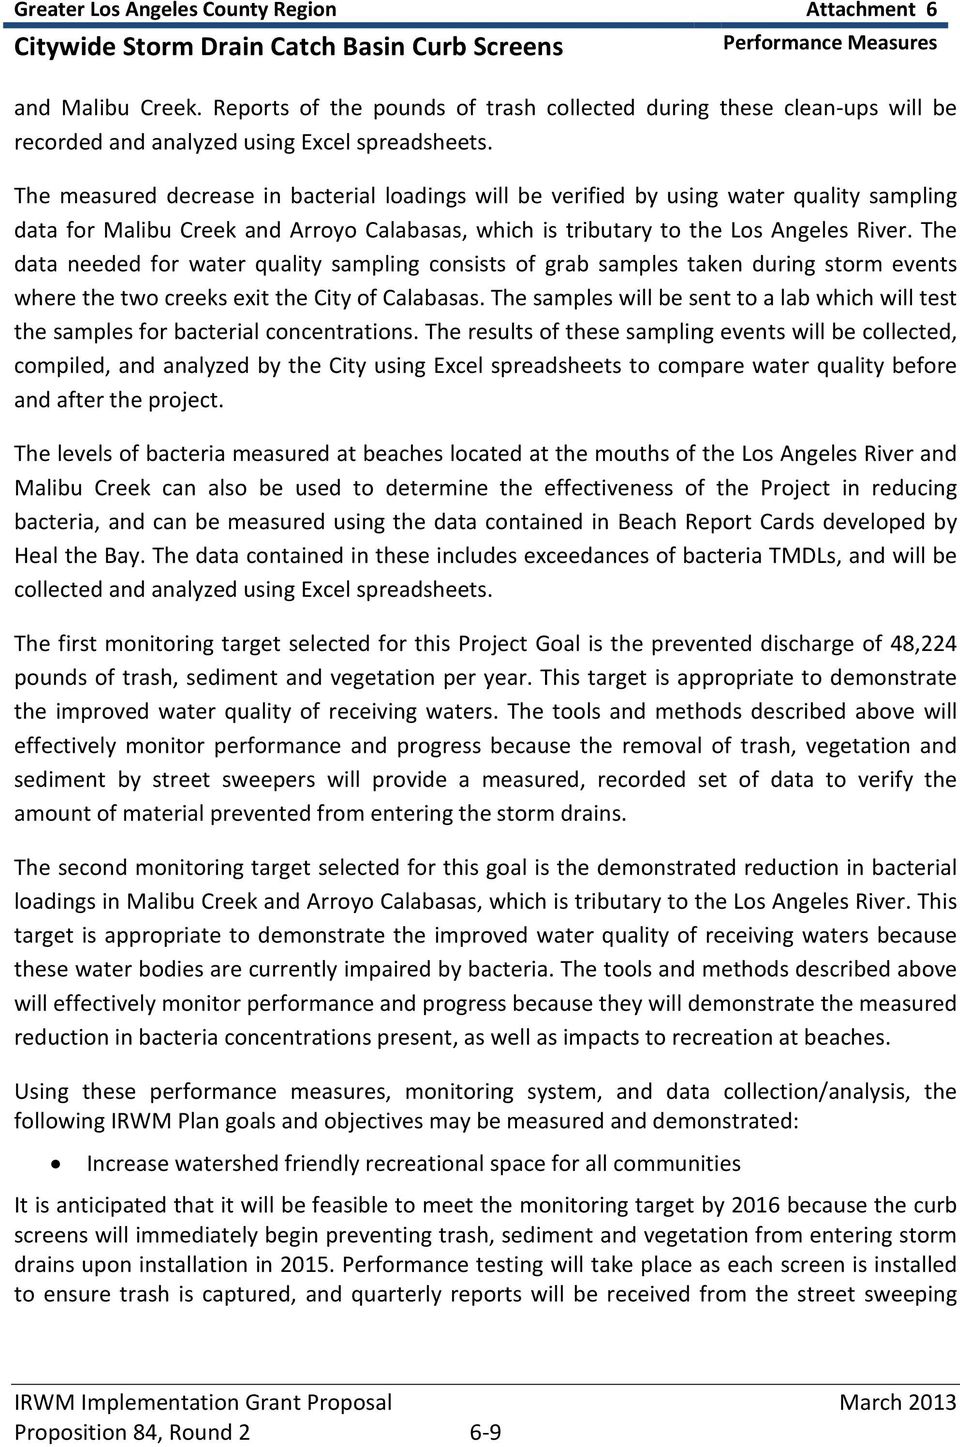 The data needed for water quality sampling consists of grab samples taken during storm events where the two creeks exit the City of Calabasas.